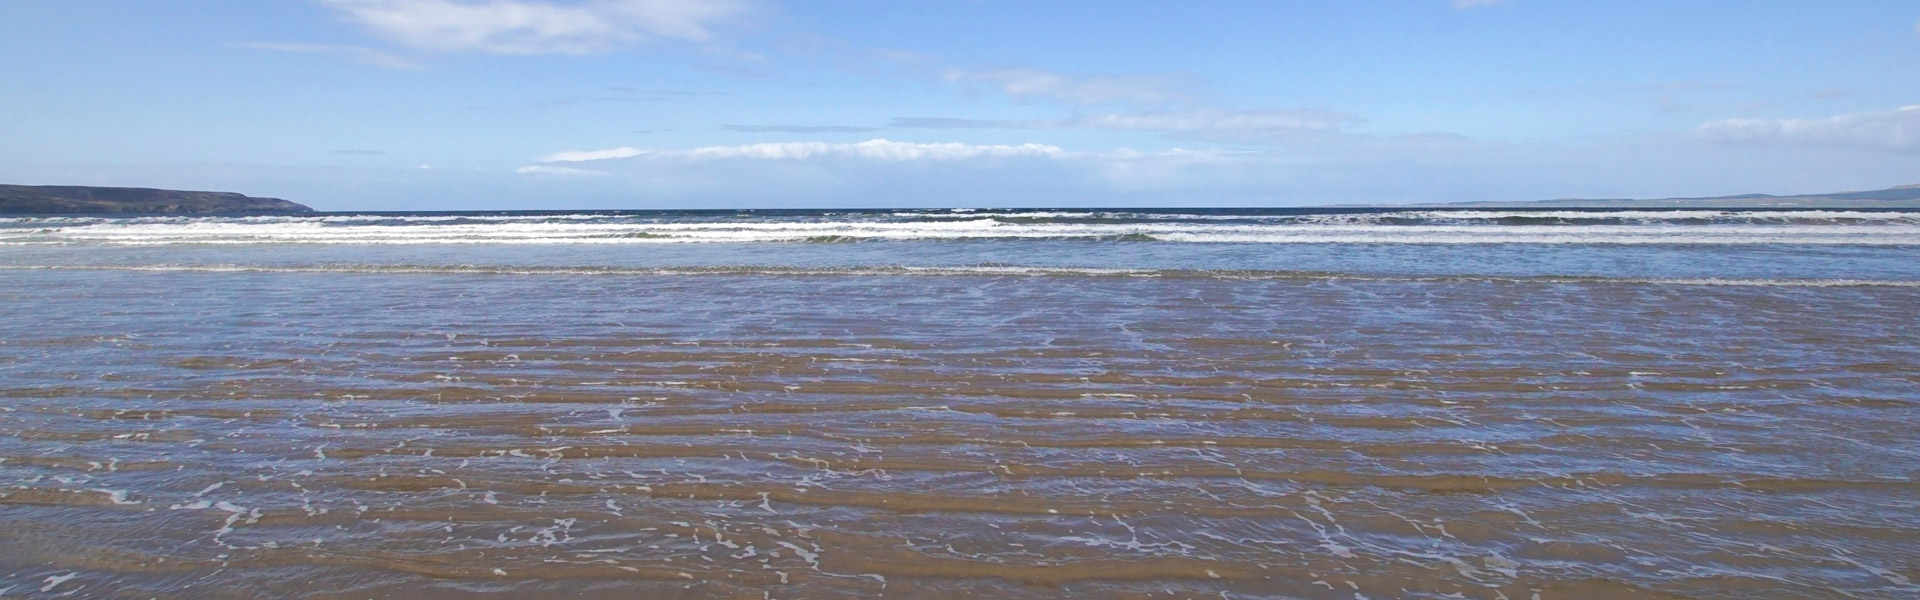 View from The Big Strand beach on Islay